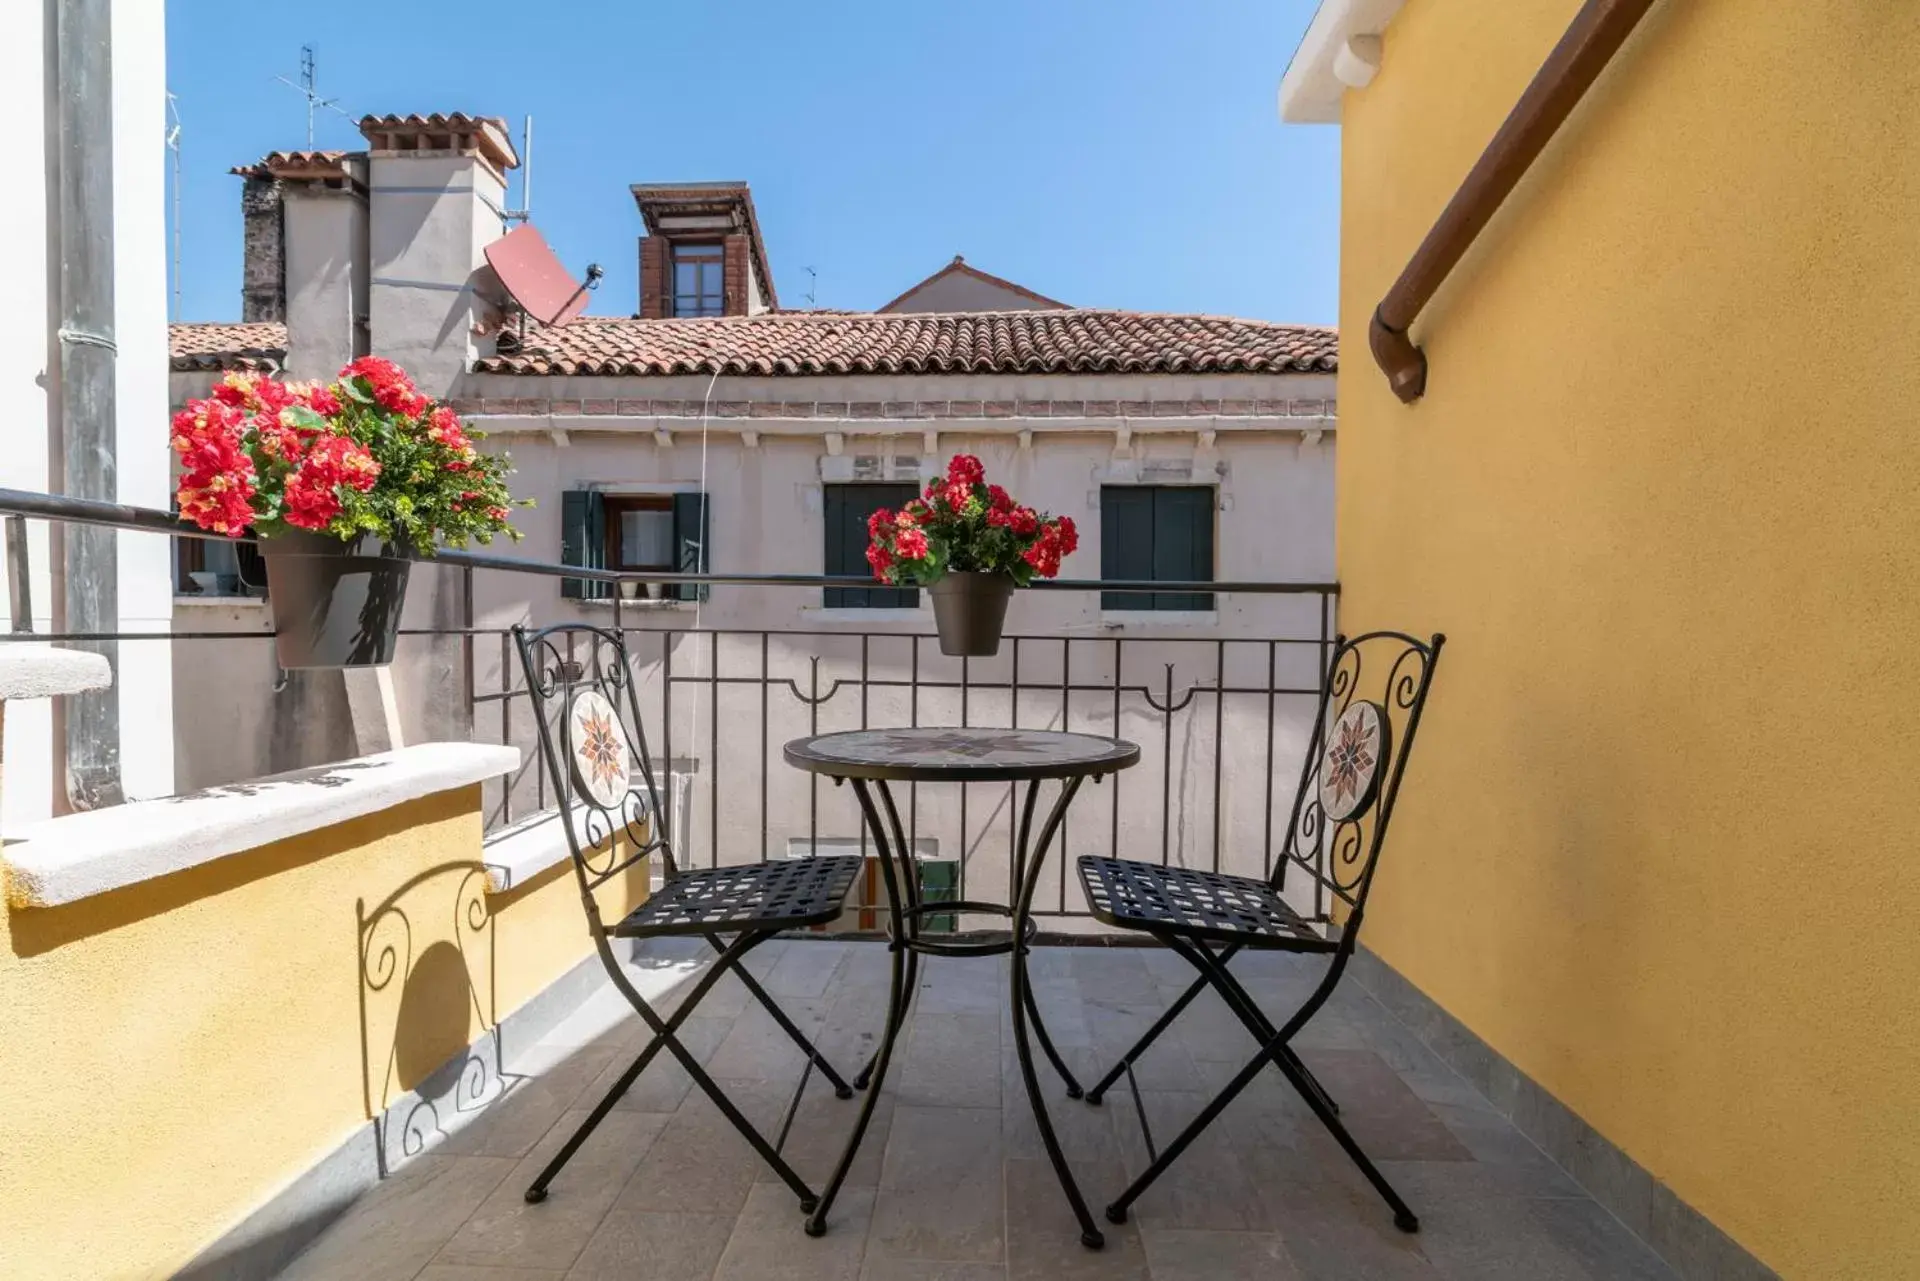 Balcony/Terrace in Grifoni Boutique Hotel